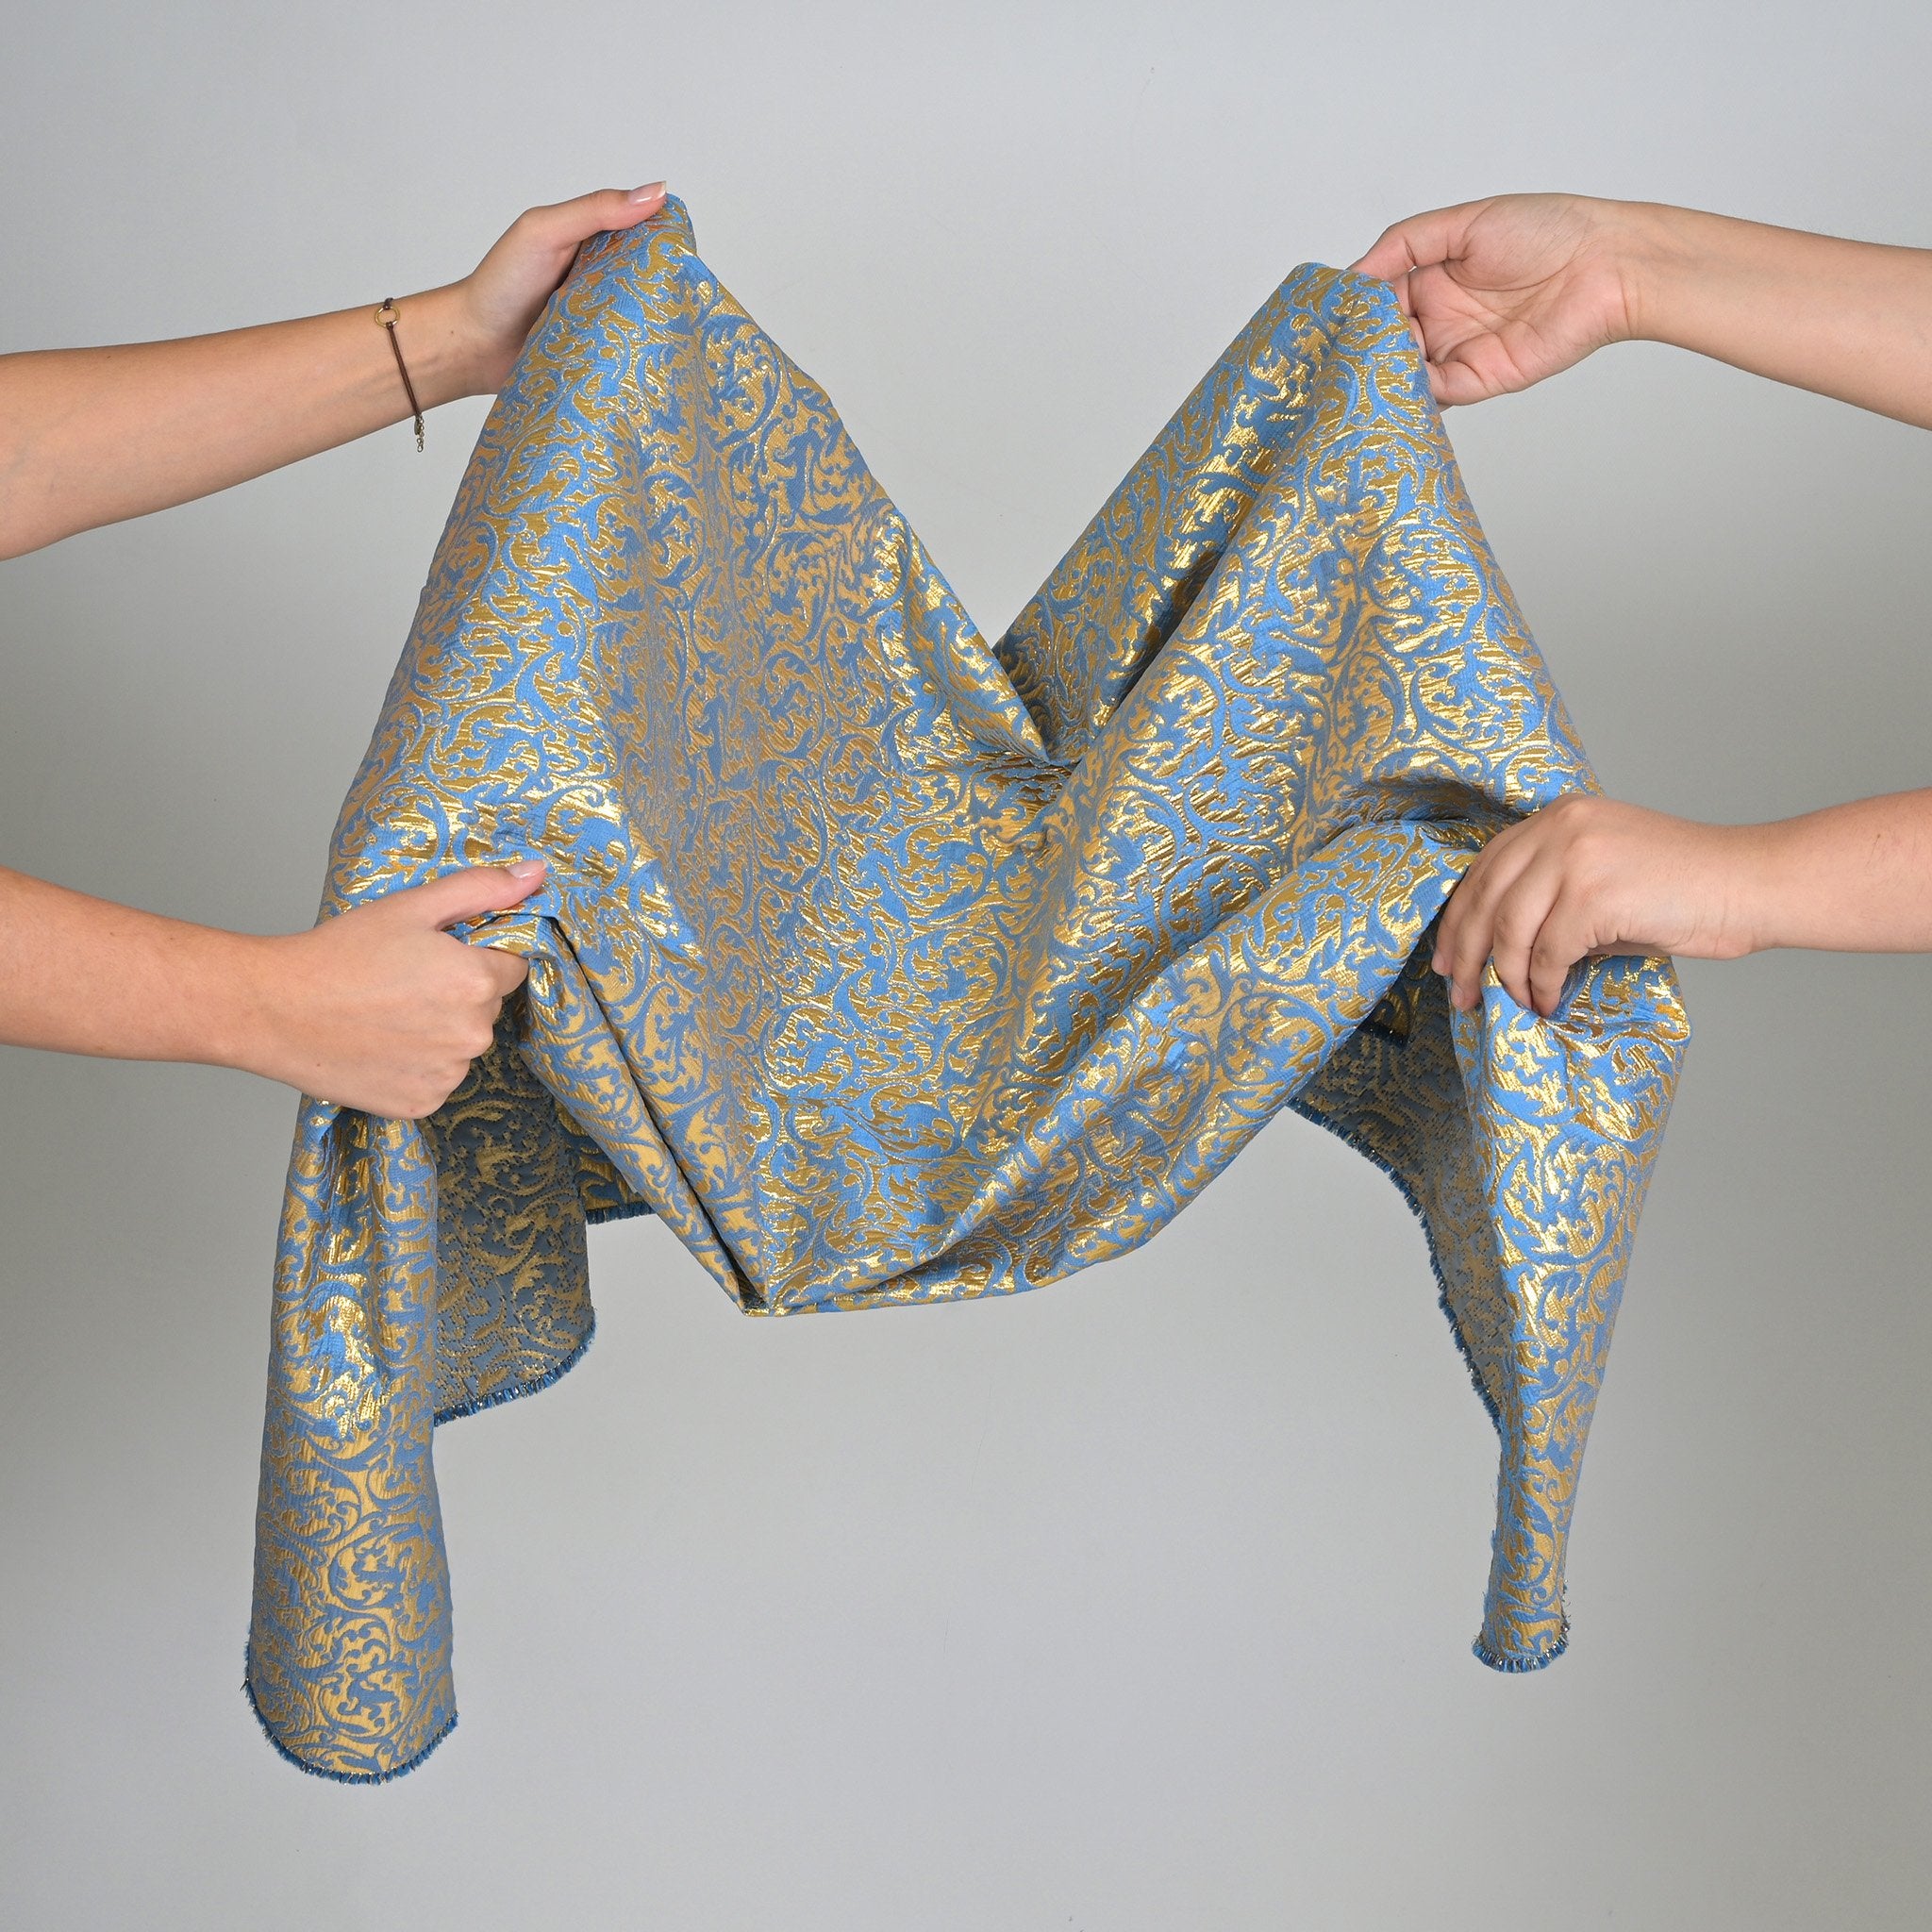 Gold and Blue Jacquard Fabric 96892